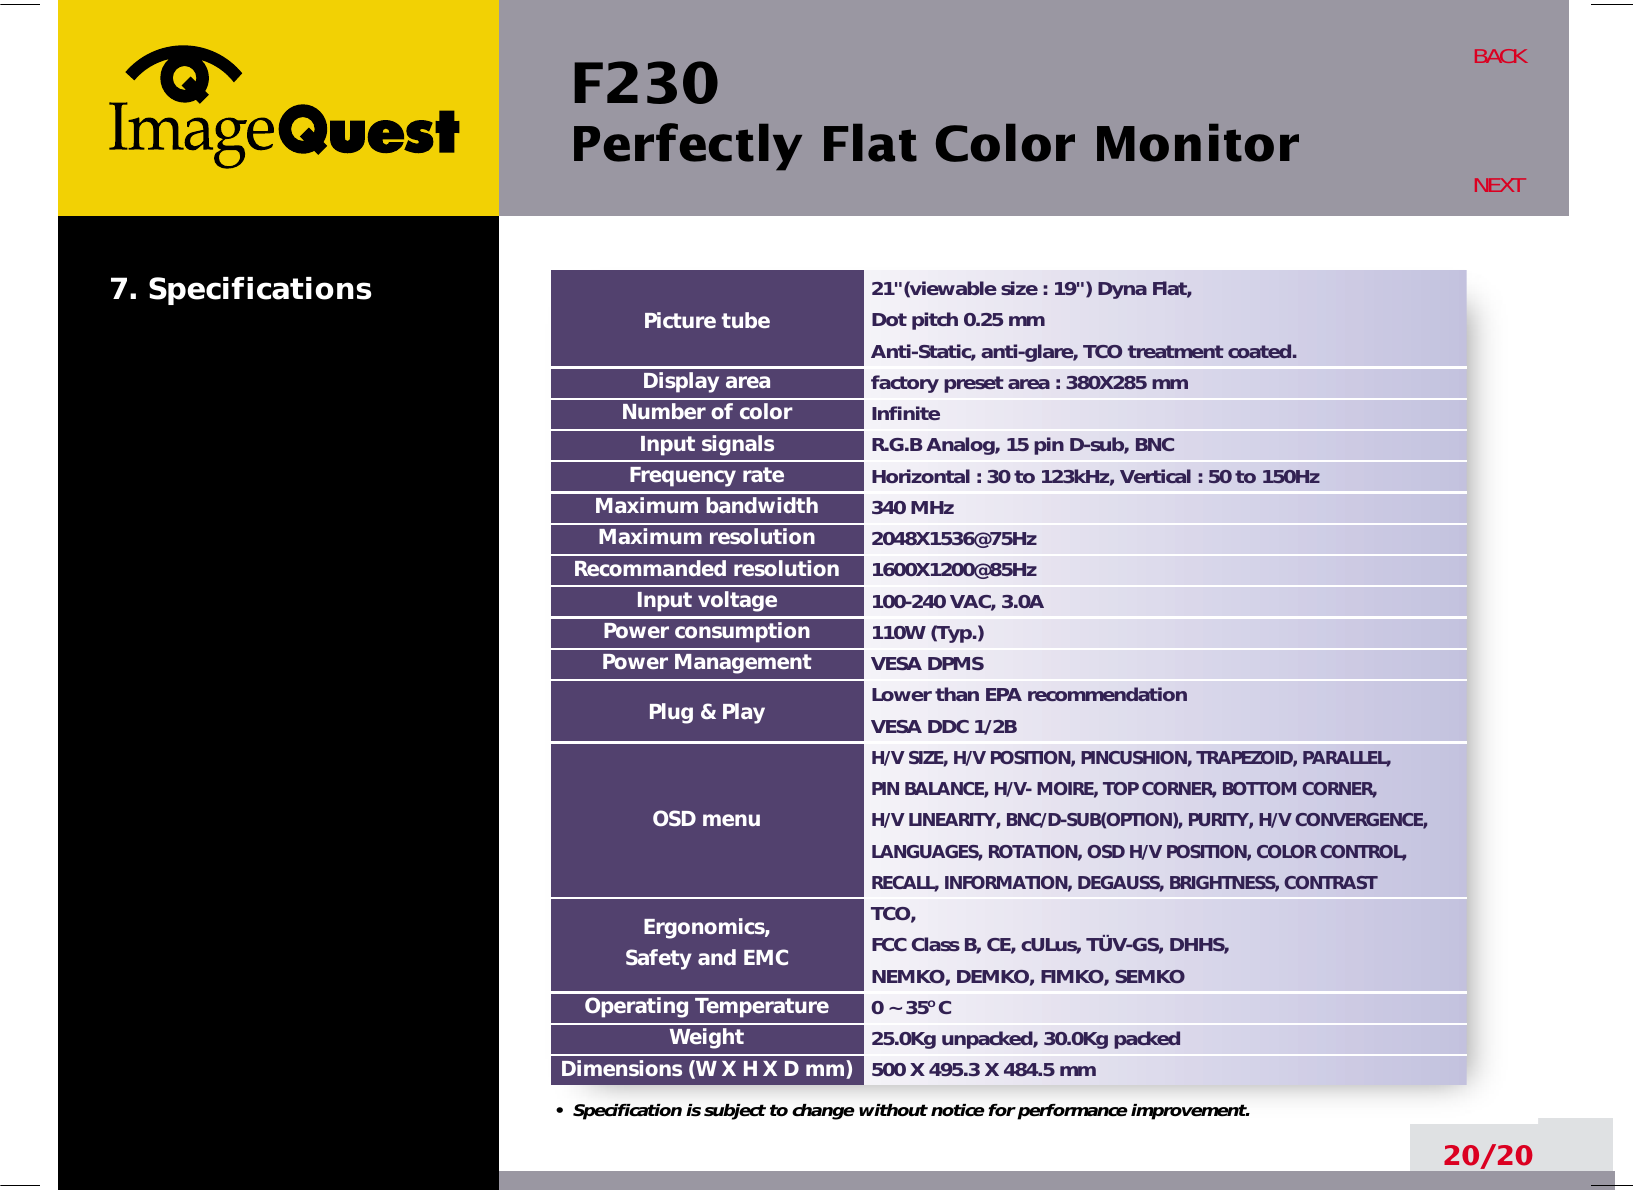 F230 Perfectly Flat Color Monitor20/20BACKNEXT21&quot;(viewable size : 19&quot;) Dyna Flat, Dot pitch 0.25 mmAnti-Static, anti-glare, TCO treatment coated.factory preset area : 380X285 mm InfiniteR.G.B Analog, 15 pin D-sub, BNCHorizontal : 30 to 123kHz, Vertical : 50 to 150Hz340 MHz2048X1536@75Hz1600X1200@85Hz100-240 VAC, 3.0A 110W (Typ.)VESA DPMSLower than EPA recommendationVESA DDC 1/2BH/V SIZE, H/V POSITION, PINCUSHION, TRAPEZOID, PARALLEL, PIN BALANCE, H/V- MOIRE, TOP CORNER, BOTTOM CORNER, H/V LINEARITY, BNC/D-SUB(OPTION), PURITY, H/V CONVERGENCE,LANGUAGES, ROTATION, OSD H/V POSITION, COLOR CONTROL,RECALL, INFORMATION, DEGAUSS, BRIGHTNESS, CONTRASTTCO,FCC Class B, CE, cULus, TÜV-GS, DHHS, NEMKO, DEMKO, FIMKO, SEMKO 0 ~ 35O C25.0Kg unpacked, 30.0Kg packed500 X 495.3 X 484.5 mmPicture tubeDisplay areaNumber of colorInput signalsFrequency rateMaximum bandwidthMaximum resolutionRecommanded resolutionInput voltagePower consumptionPower ManagementPlug &amp; PlayOSD menuErgonomics,Safety and EMCOperating TemperatureWeightDimensions (W X H X D mm)•  Specification is subject to change without notice for performance improvement.7. Specifications